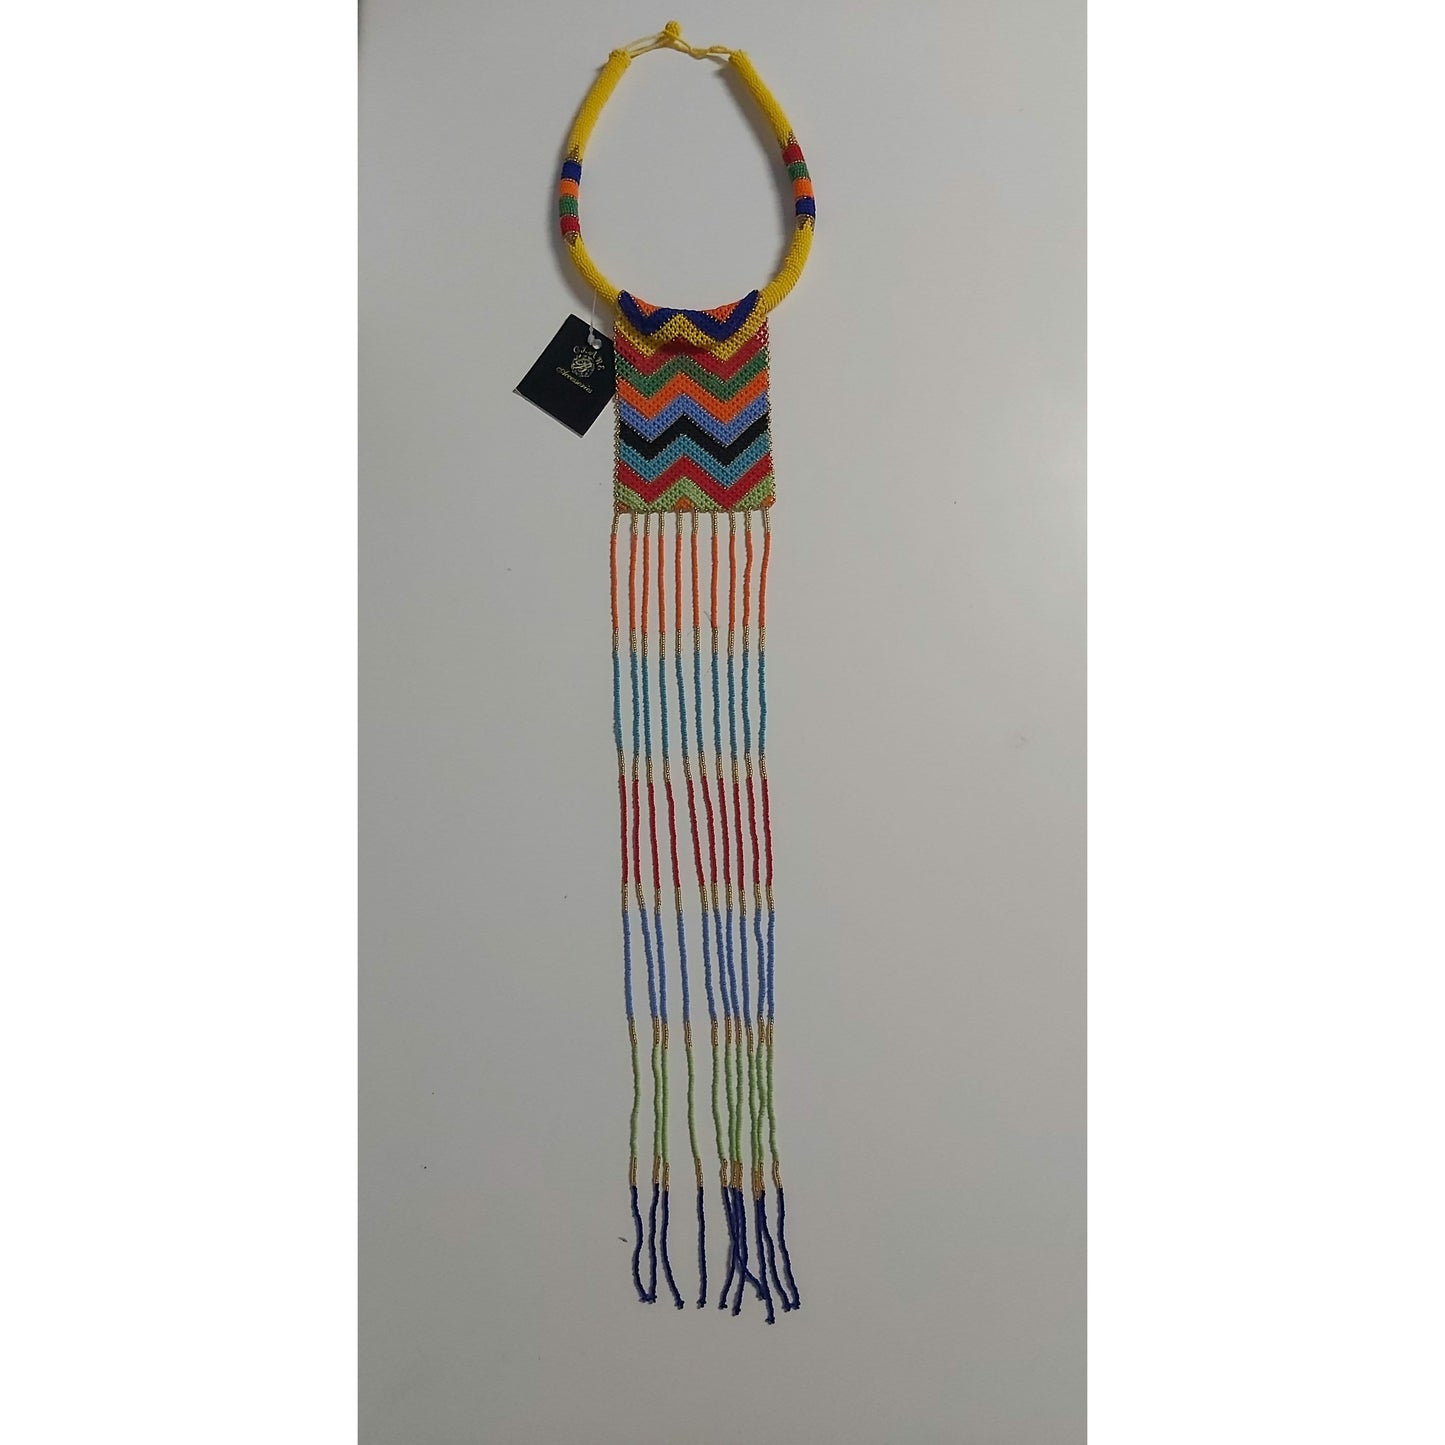 Beaded Neckring with Tassels